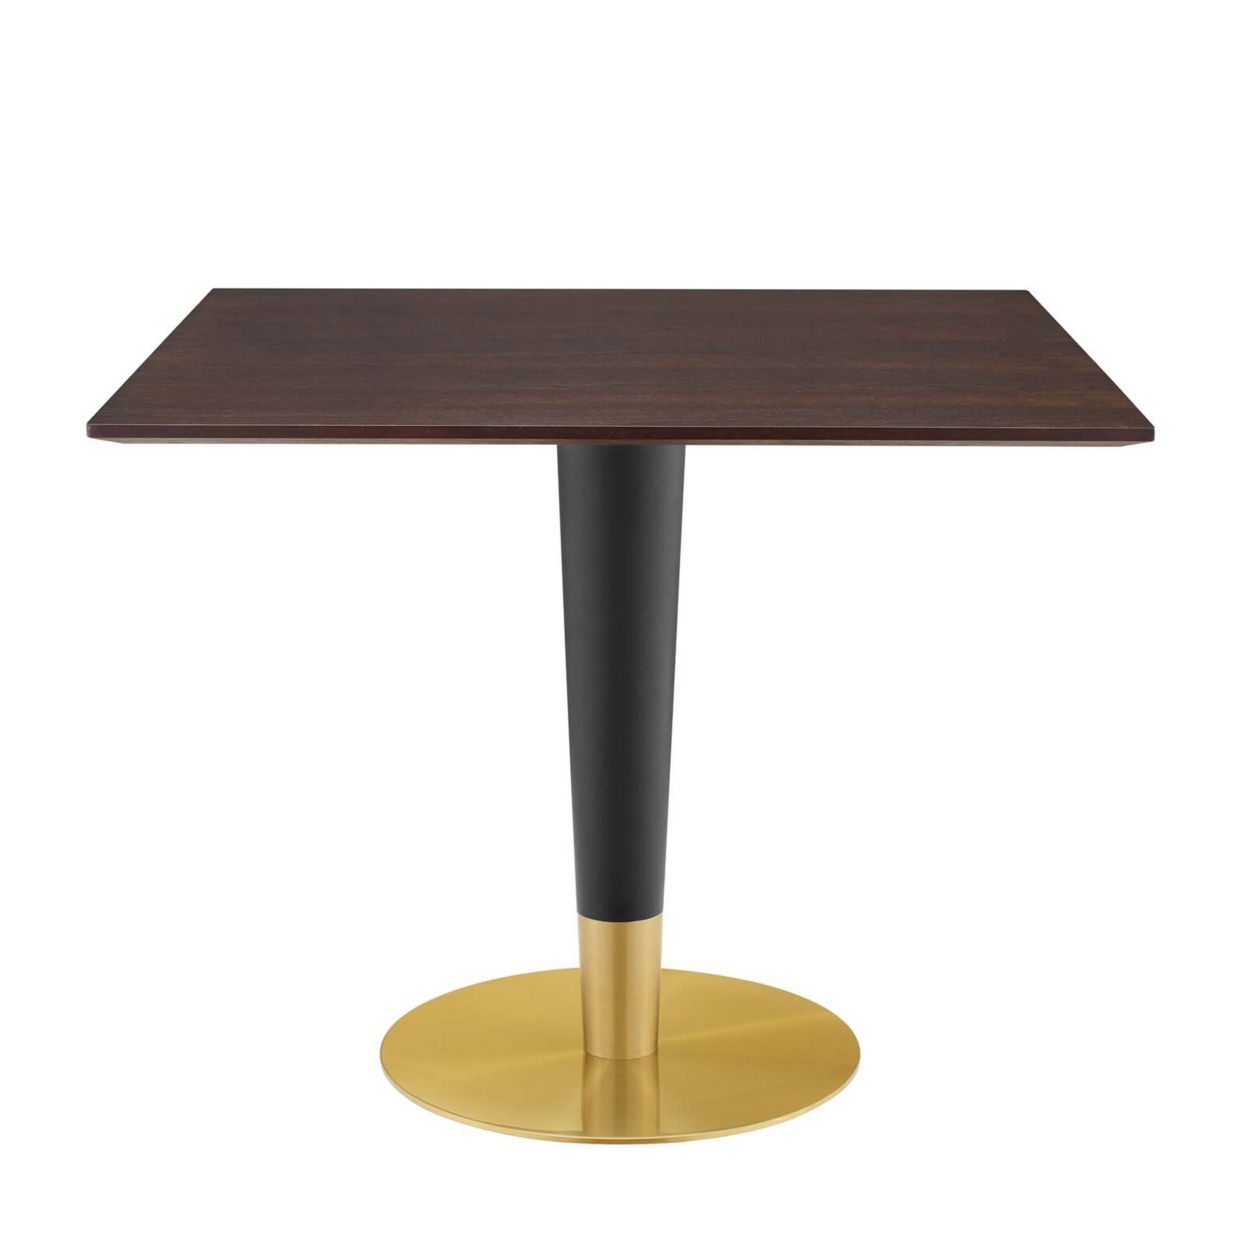 Zinque 36 Square Dining Table, Gold Cherry Walnut